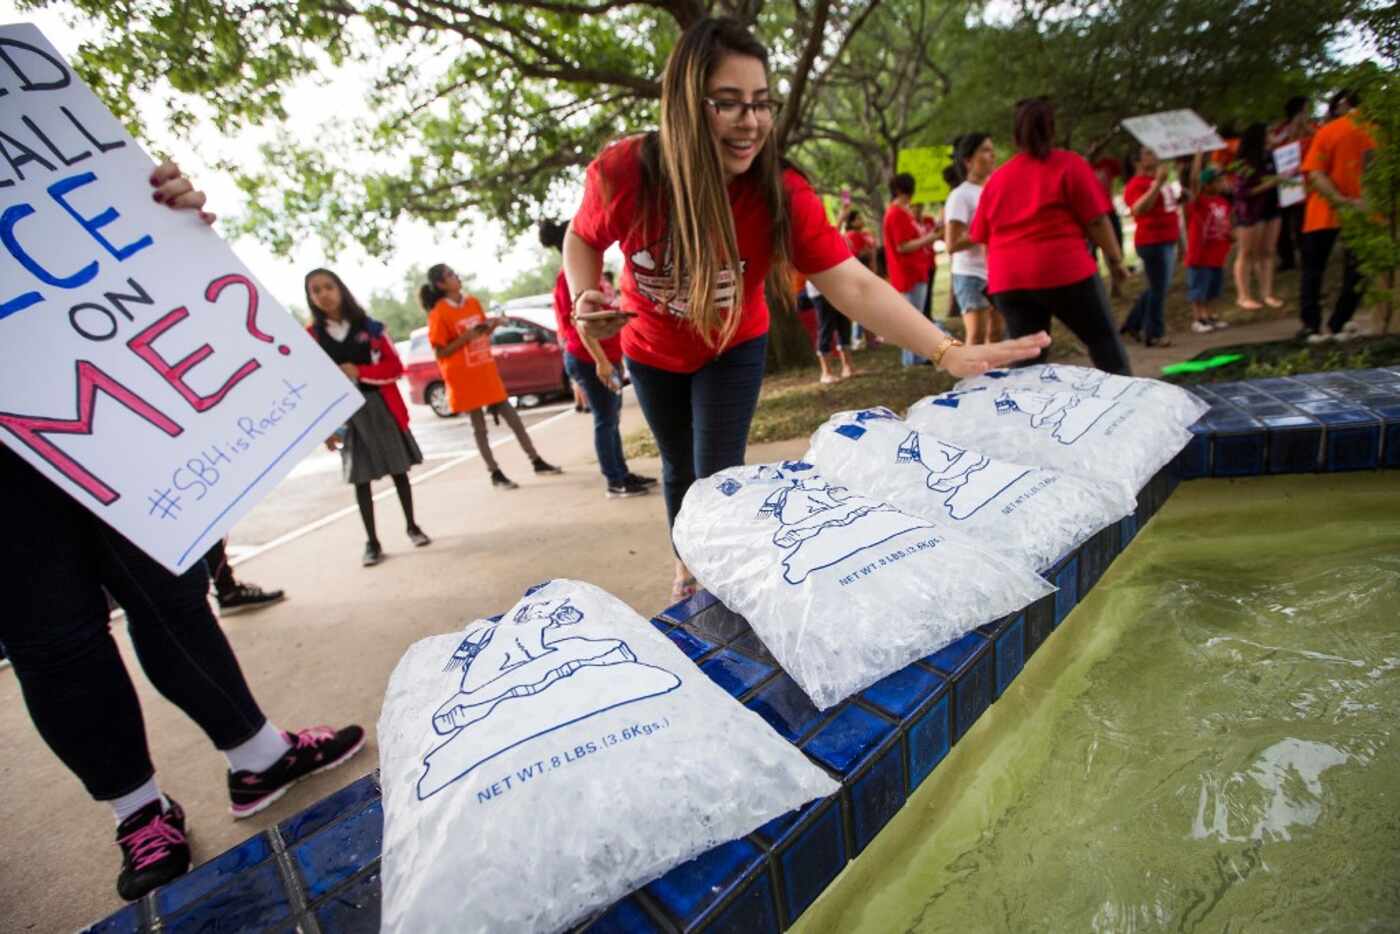 Opponents of the SB 4 law, Texas' "sanctuary cities" legislation, set out bags of ice as...